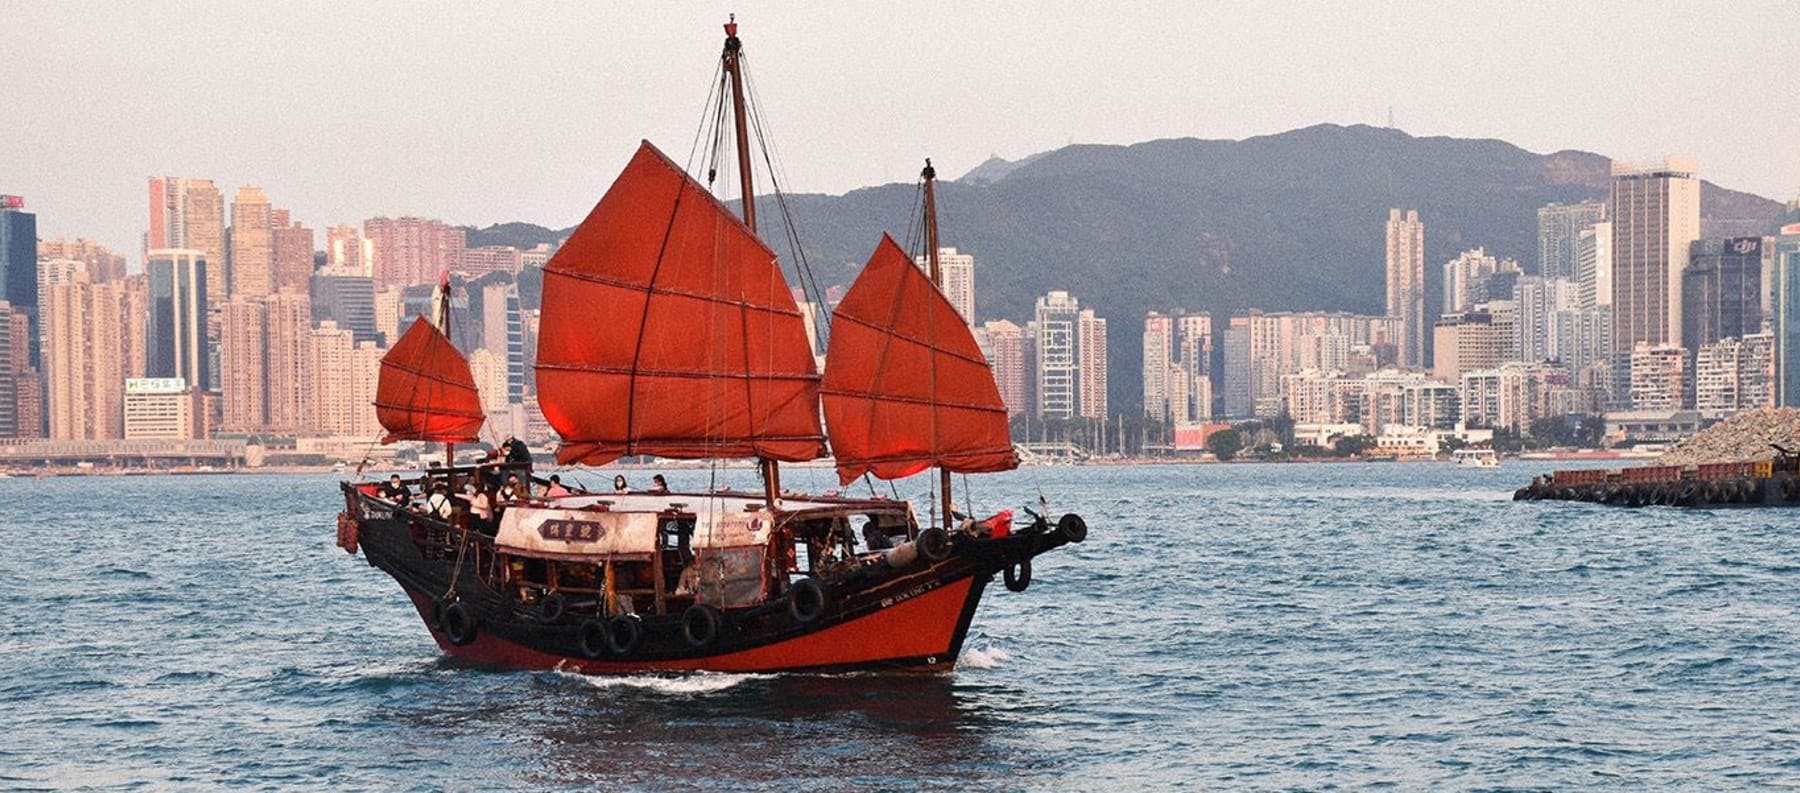 A red junk boat sailing in the sea in Hong Kong